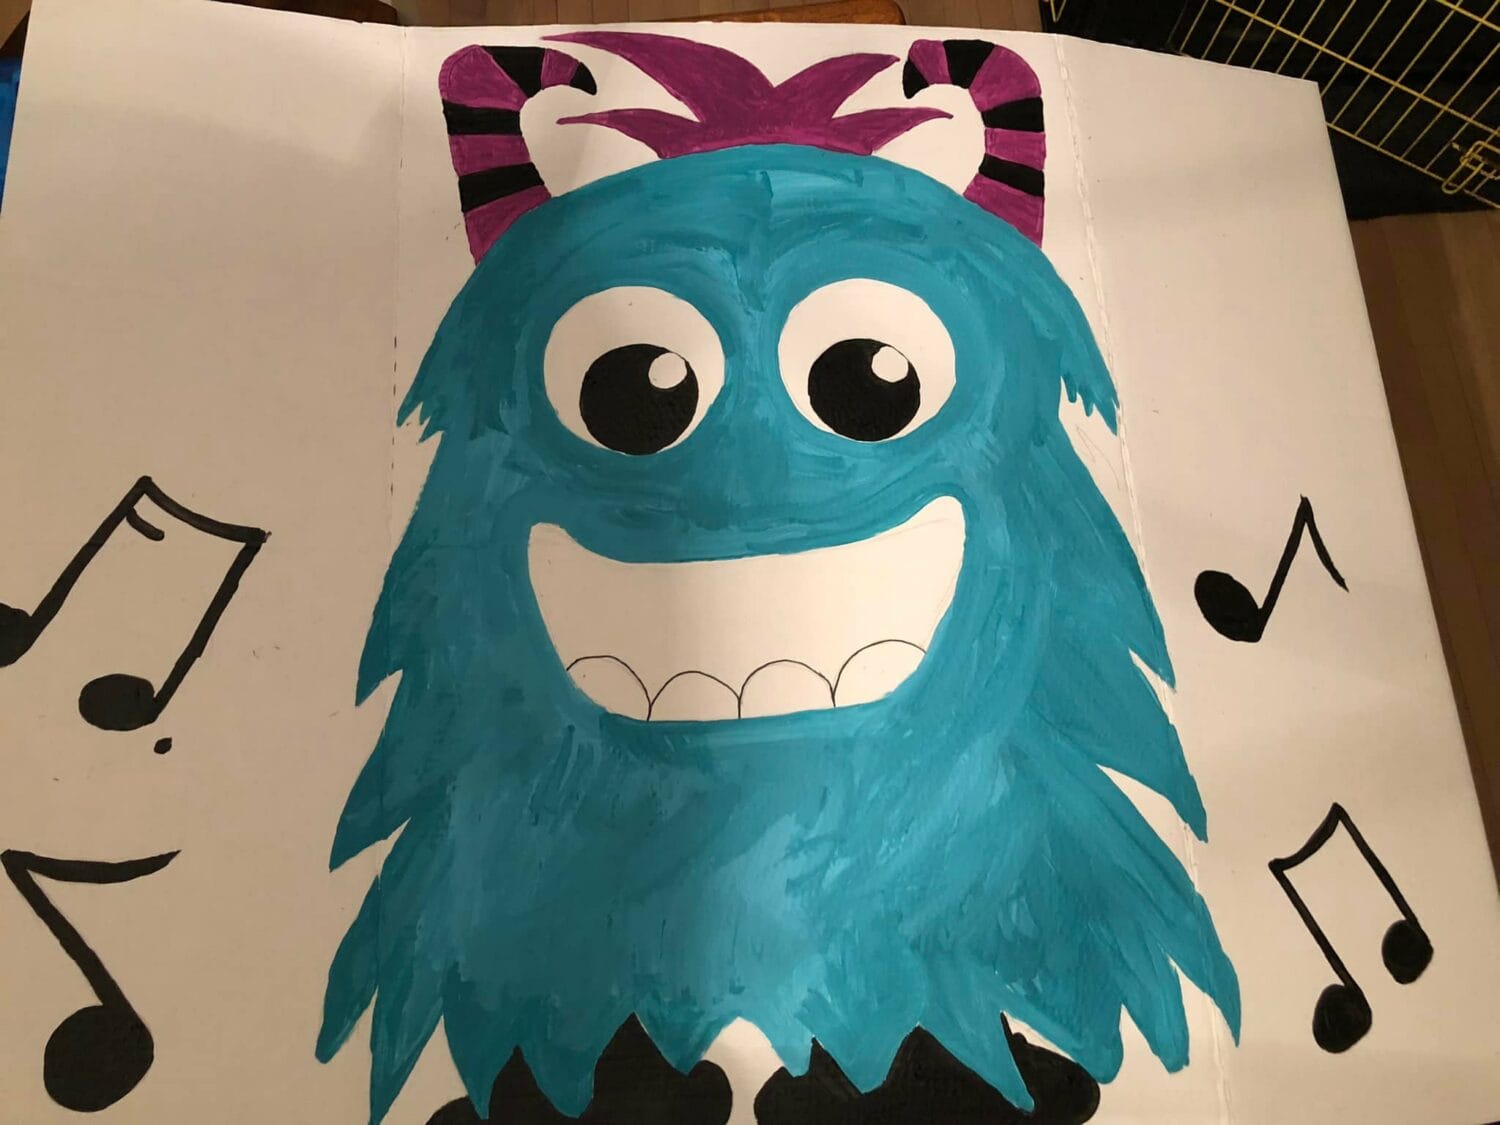 Singing Time Primary Song Monster!! Create a cute monster to gobble up your lyrics, flip chart, or whole song as you learn them. See all the fun ways to use this singing time idea and tons of example song monsters to inspire you! For LDS Primary music leaders.